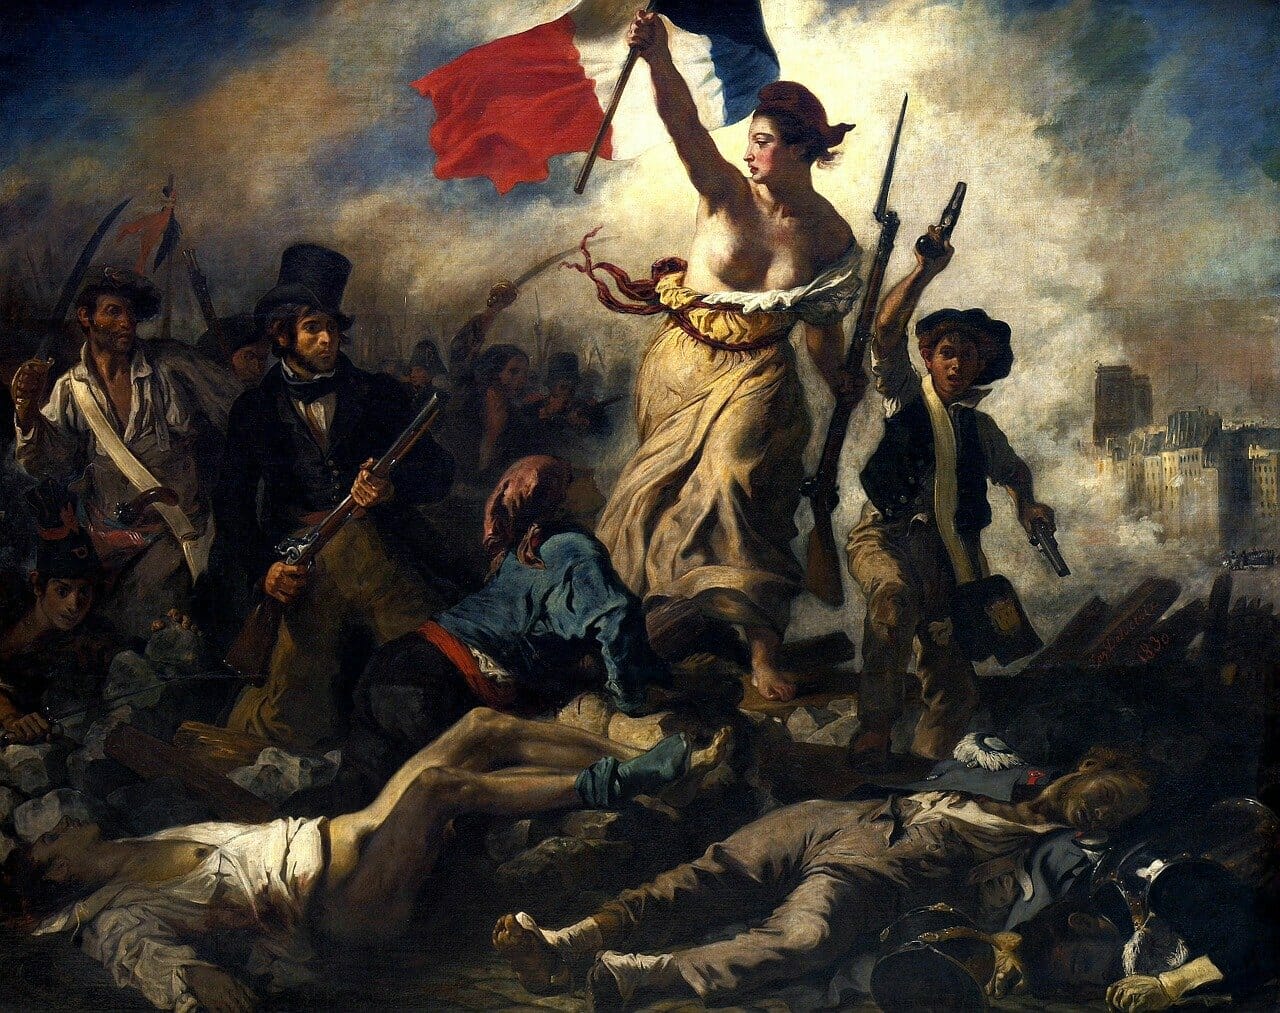 The French Revolution and today’s Digital REvolution